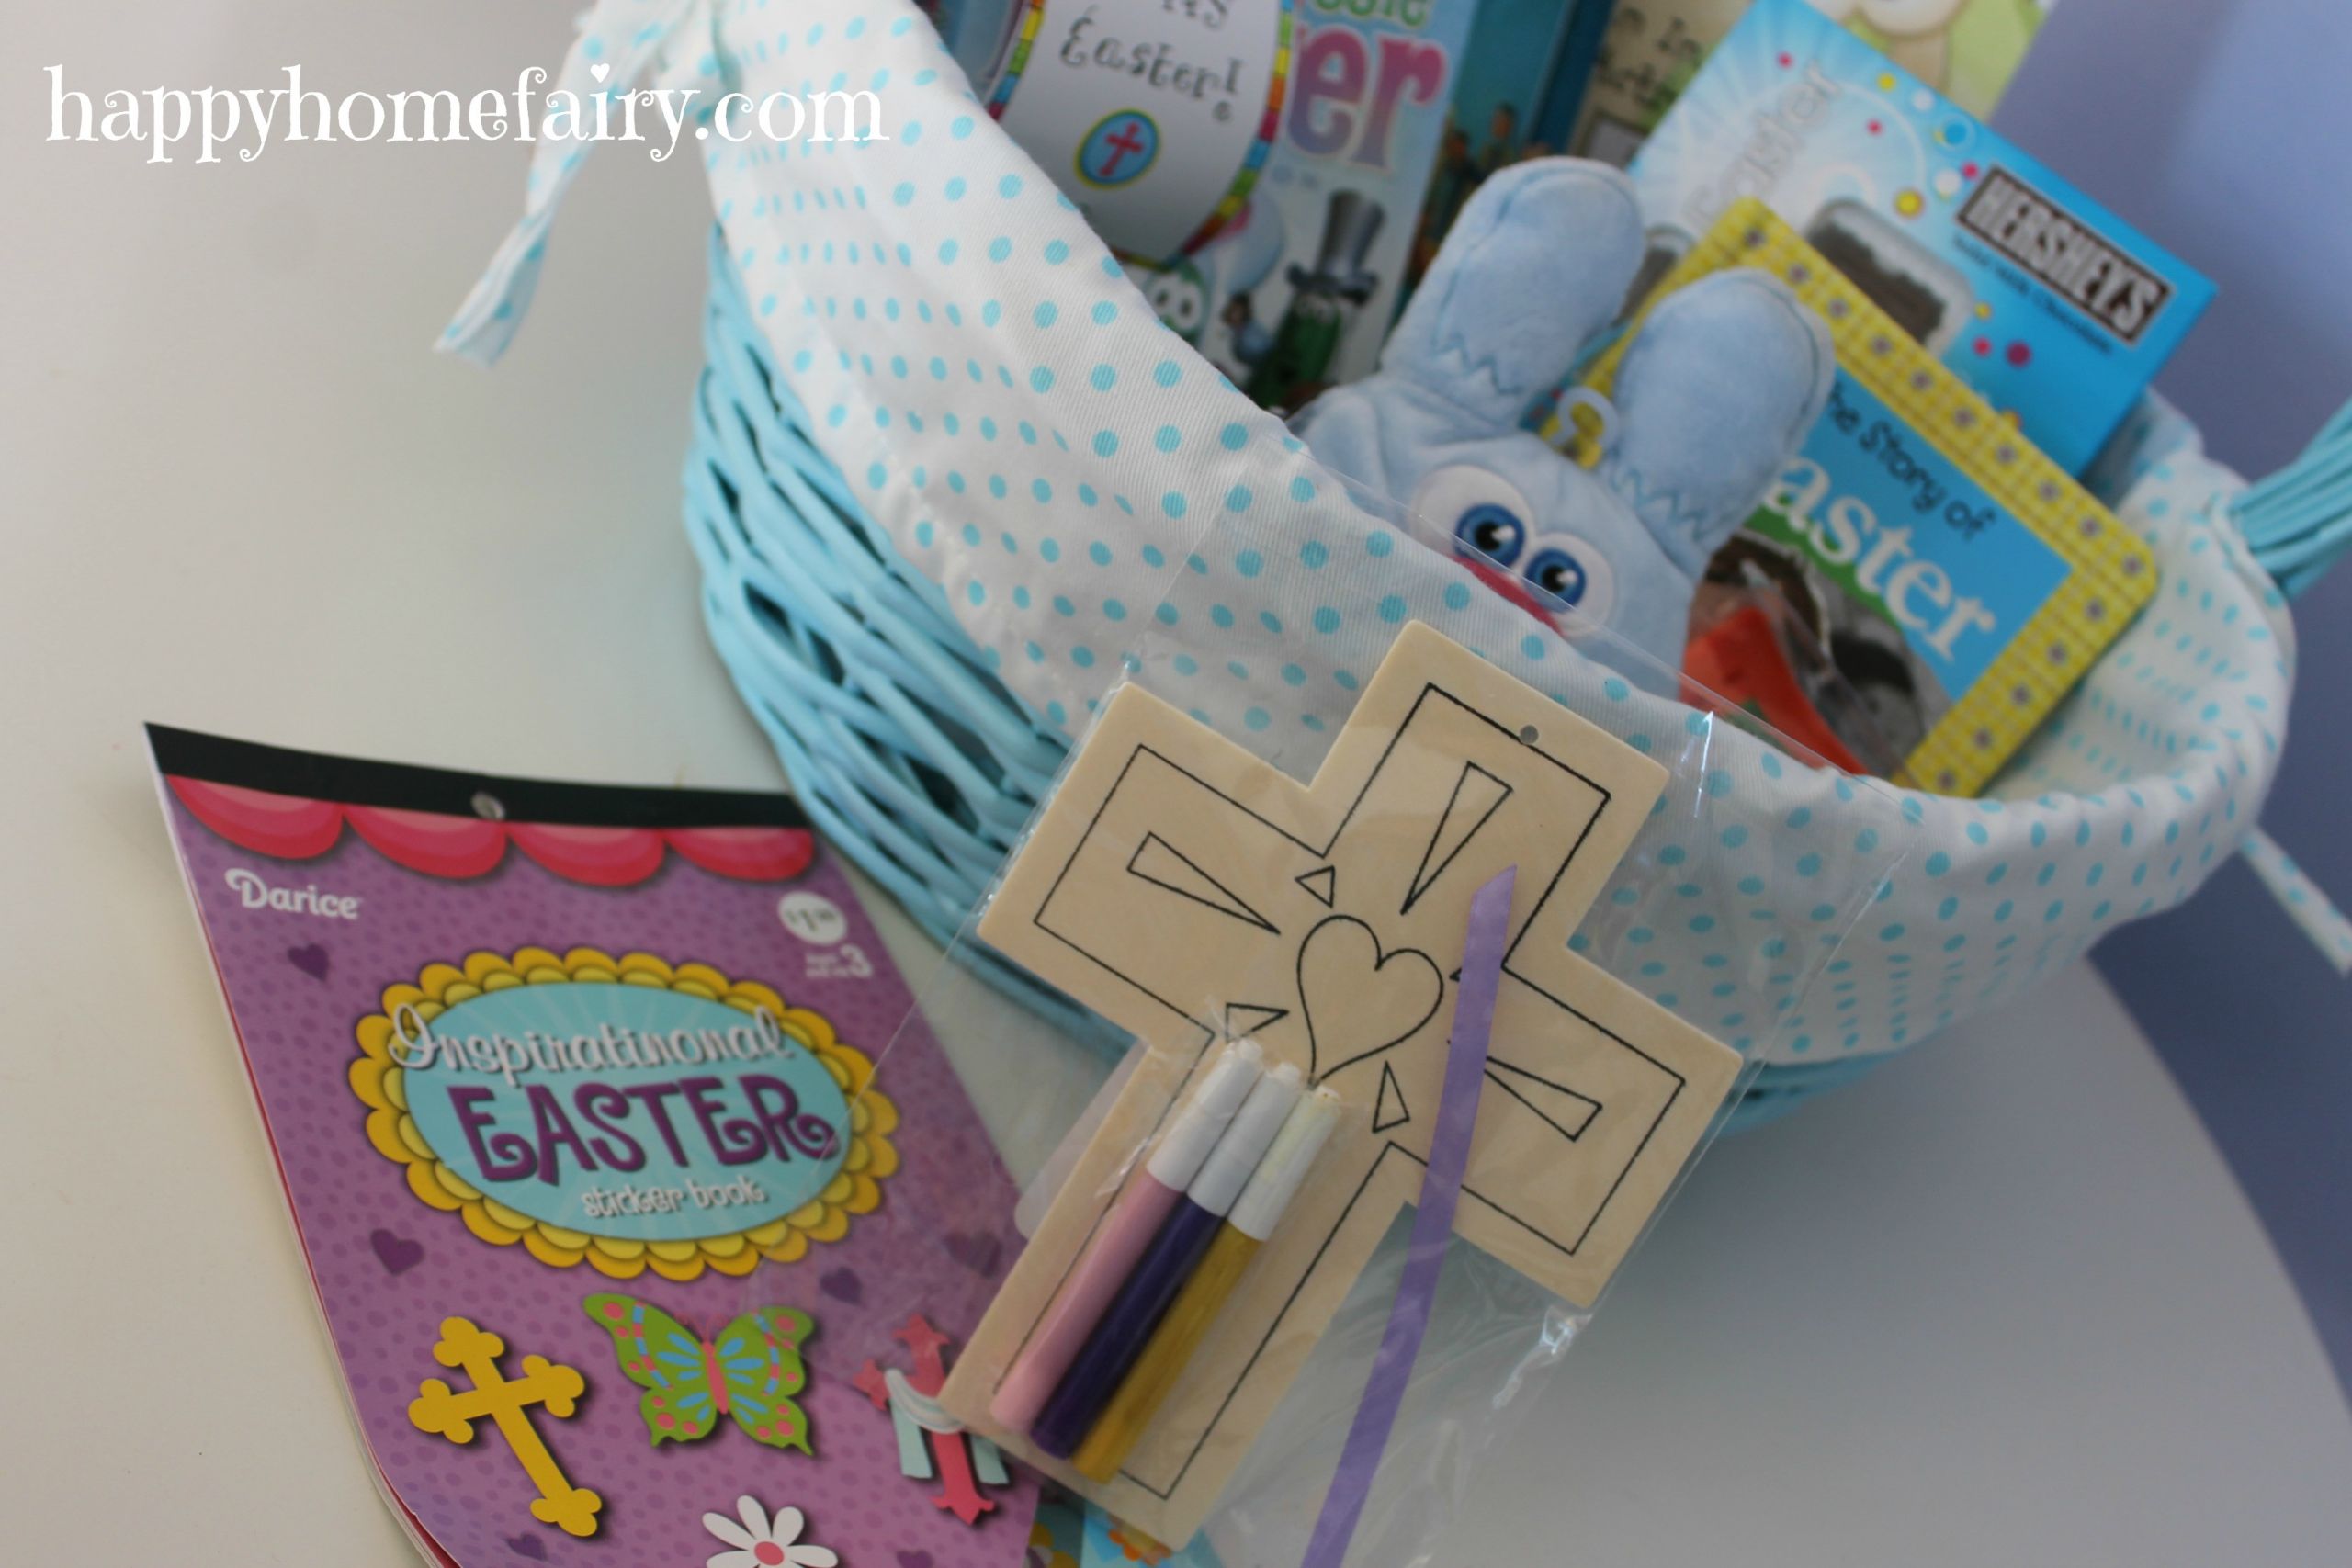 Christian Easter Gifts
 Christ Centered Easter Basket Ideas Happy Home Fairy